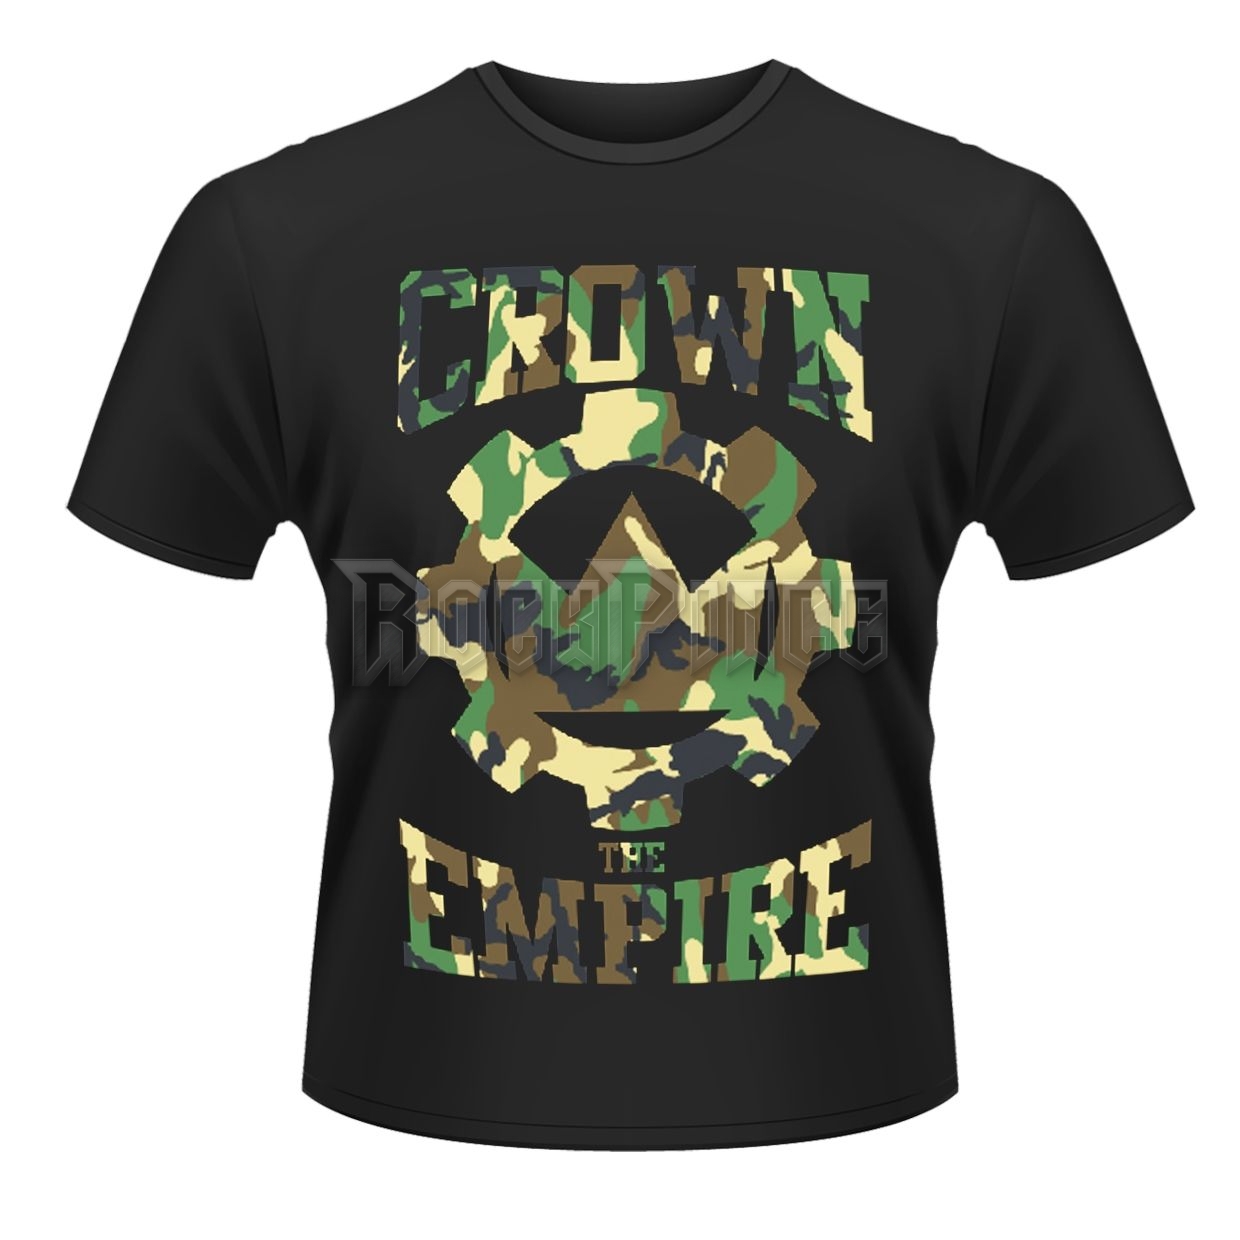 CROWN THE EMPIRE - RUN AND HIDE - PH8439